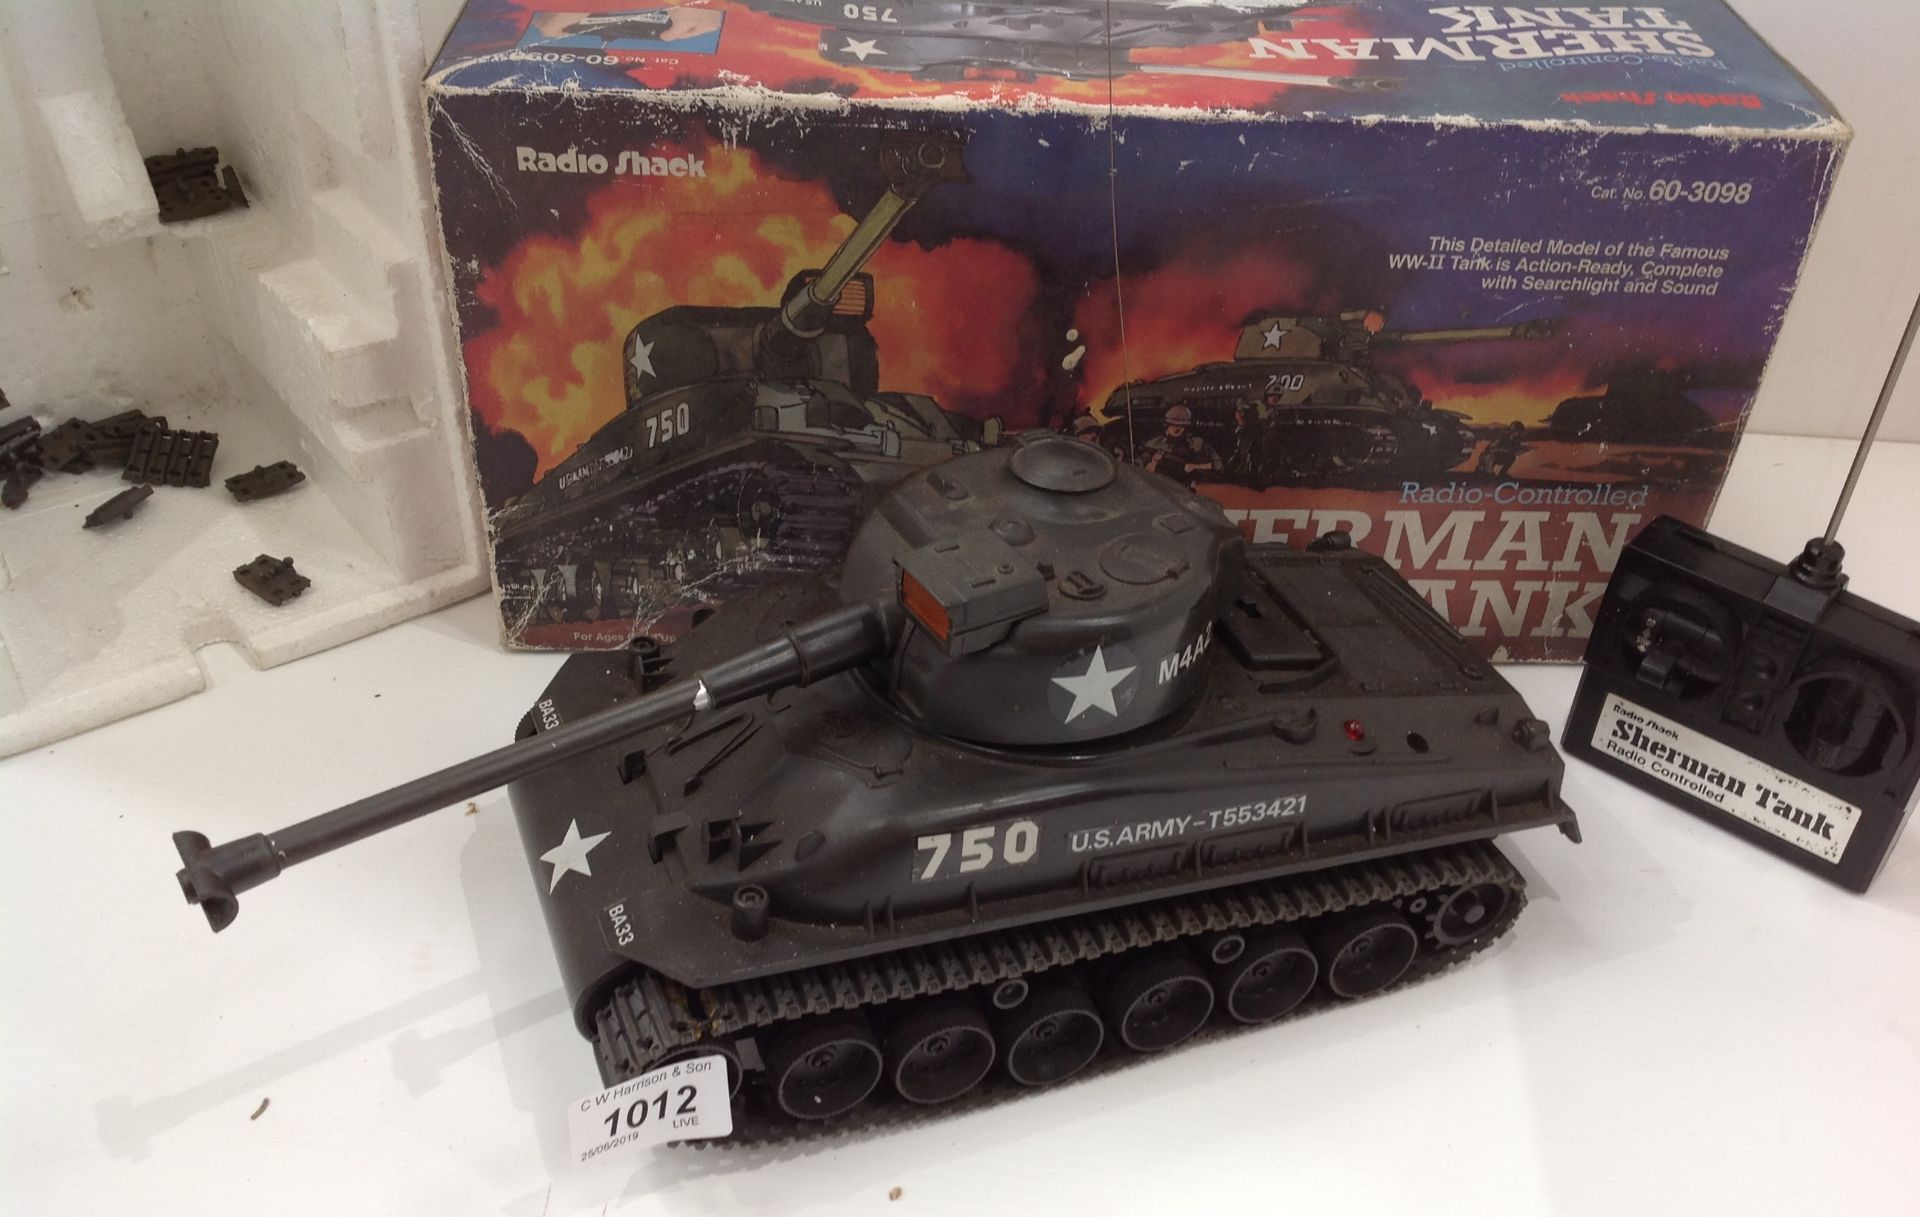 A Radio Shack radio controlled Sherman Tank catalogue number 60-3098 complete with controller and